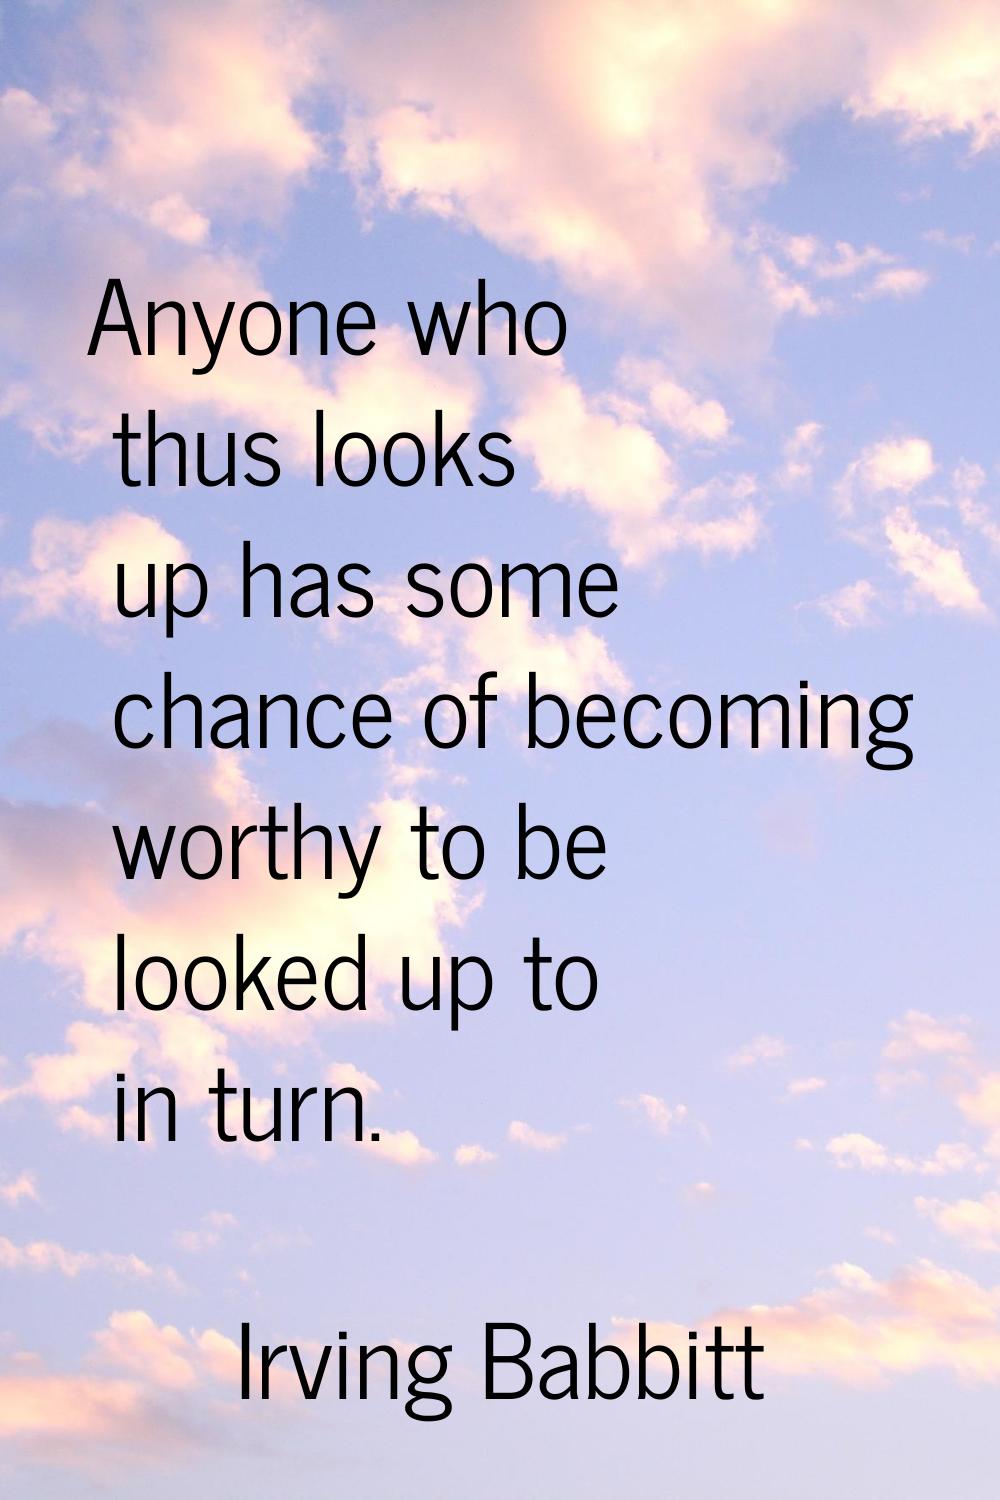 Anyone who thus looks up has some chance of becoming worthy to be looked up to in turn.